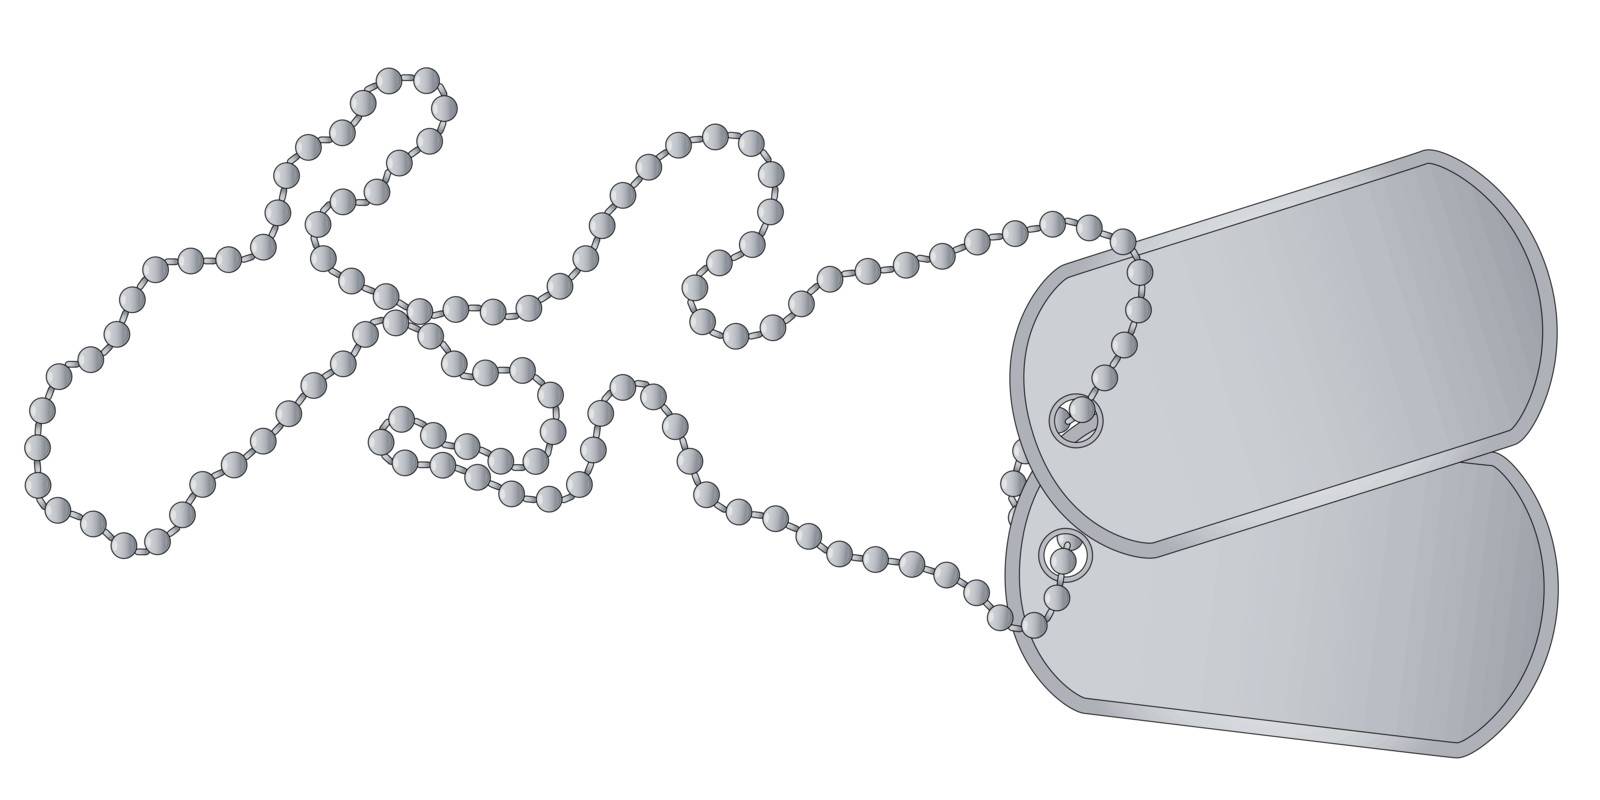 A set of military dog tags with chain